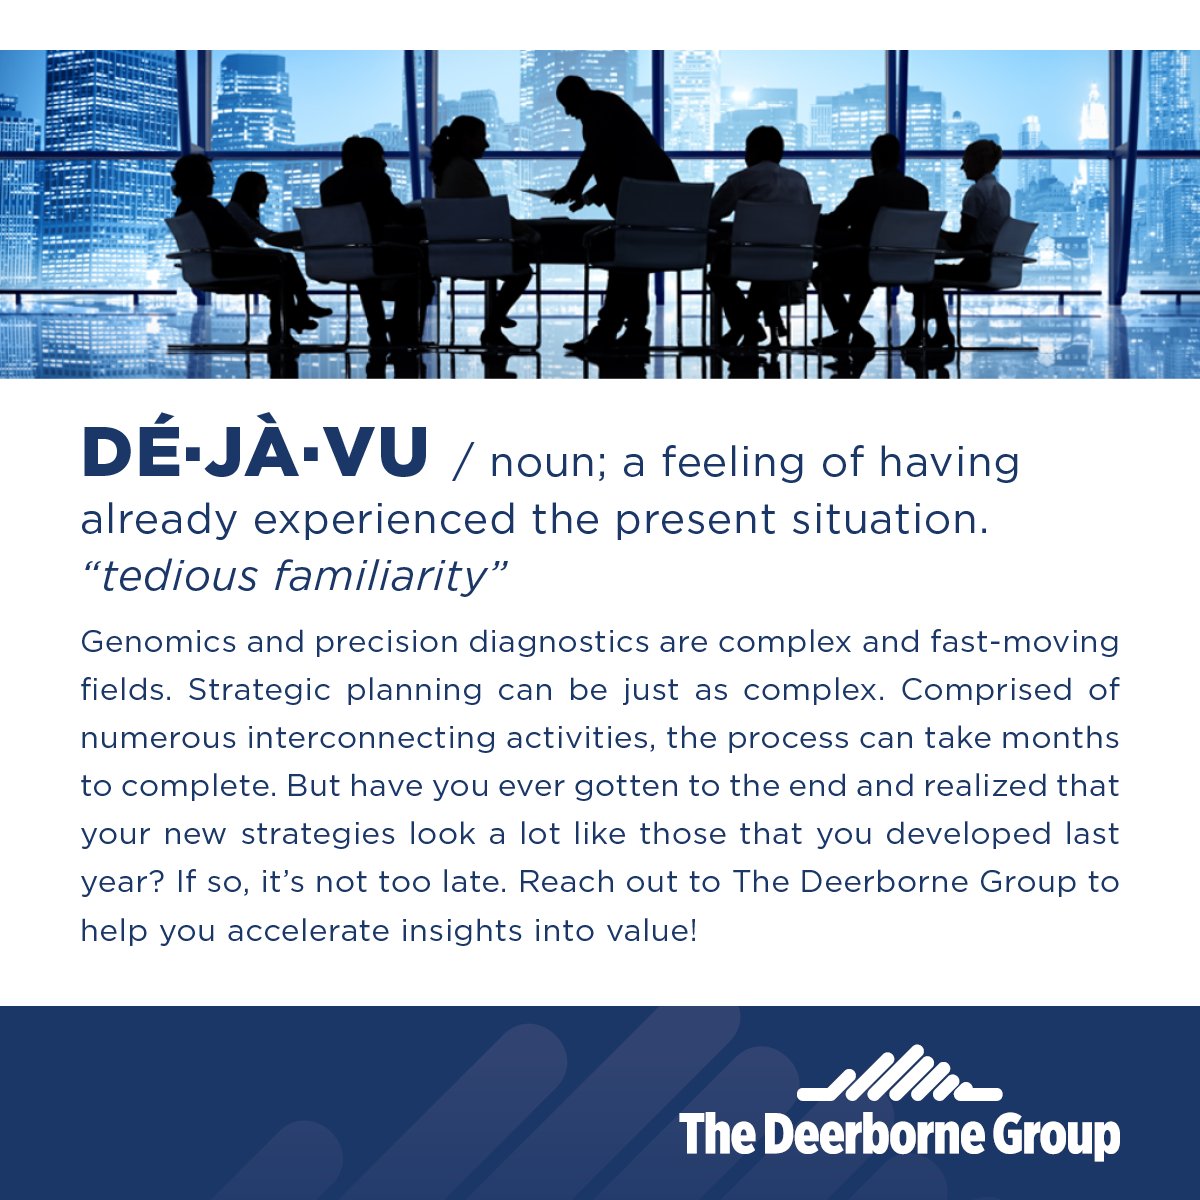 Feeling like you're stuck in a Déjà vu loop at work? The Deerborne Group, we view the future of the precision diagnostics market through a different lens. Reach out and let's shape this future together! bit.ly/3TVB3YF #ImagineMoreTogether #deerbornediffernece #ASCO24